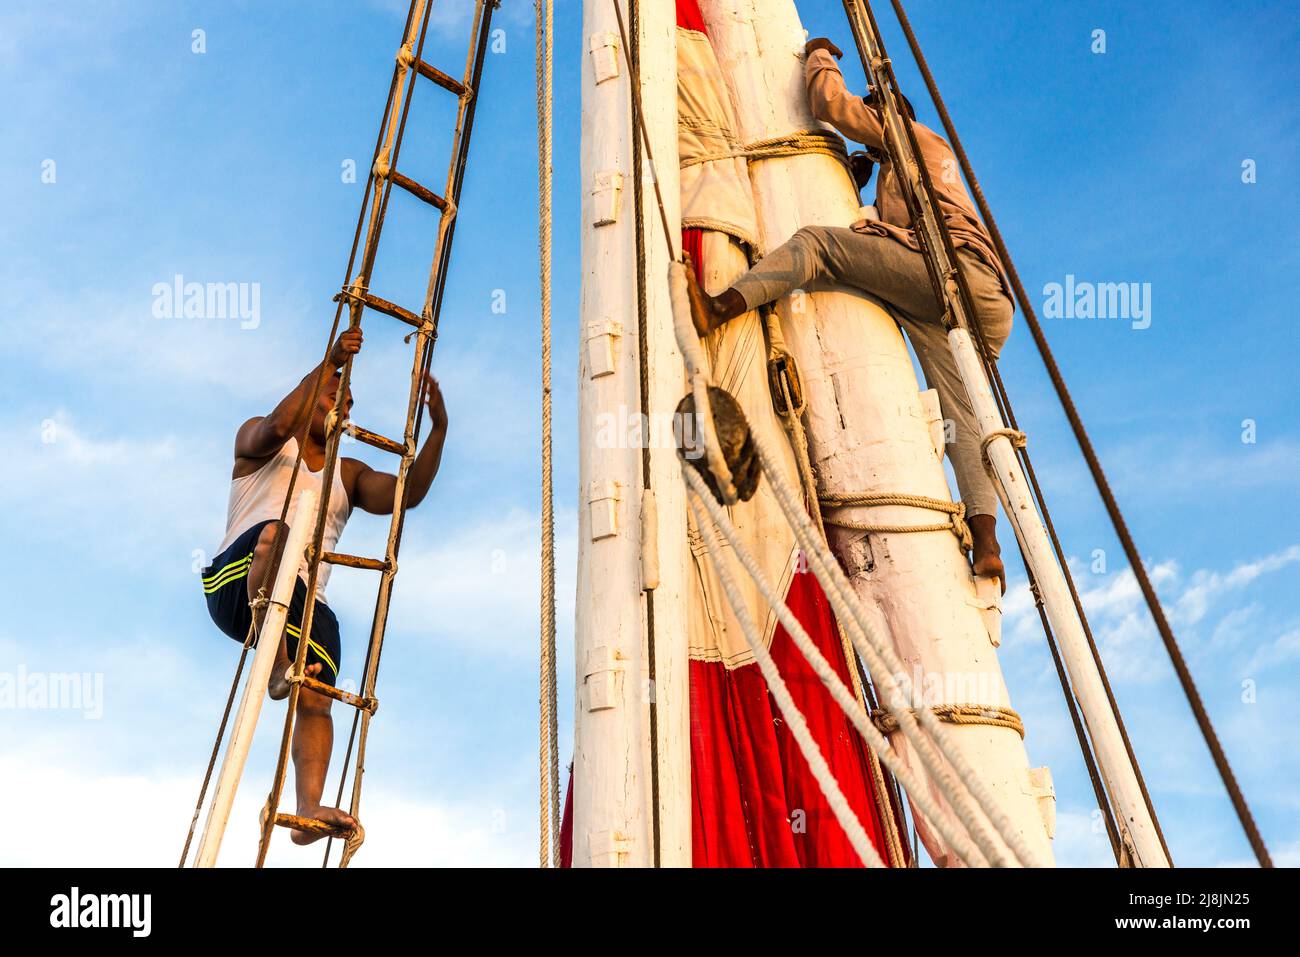 two men high on the mast fixing the rigigng and sails Stock Photo